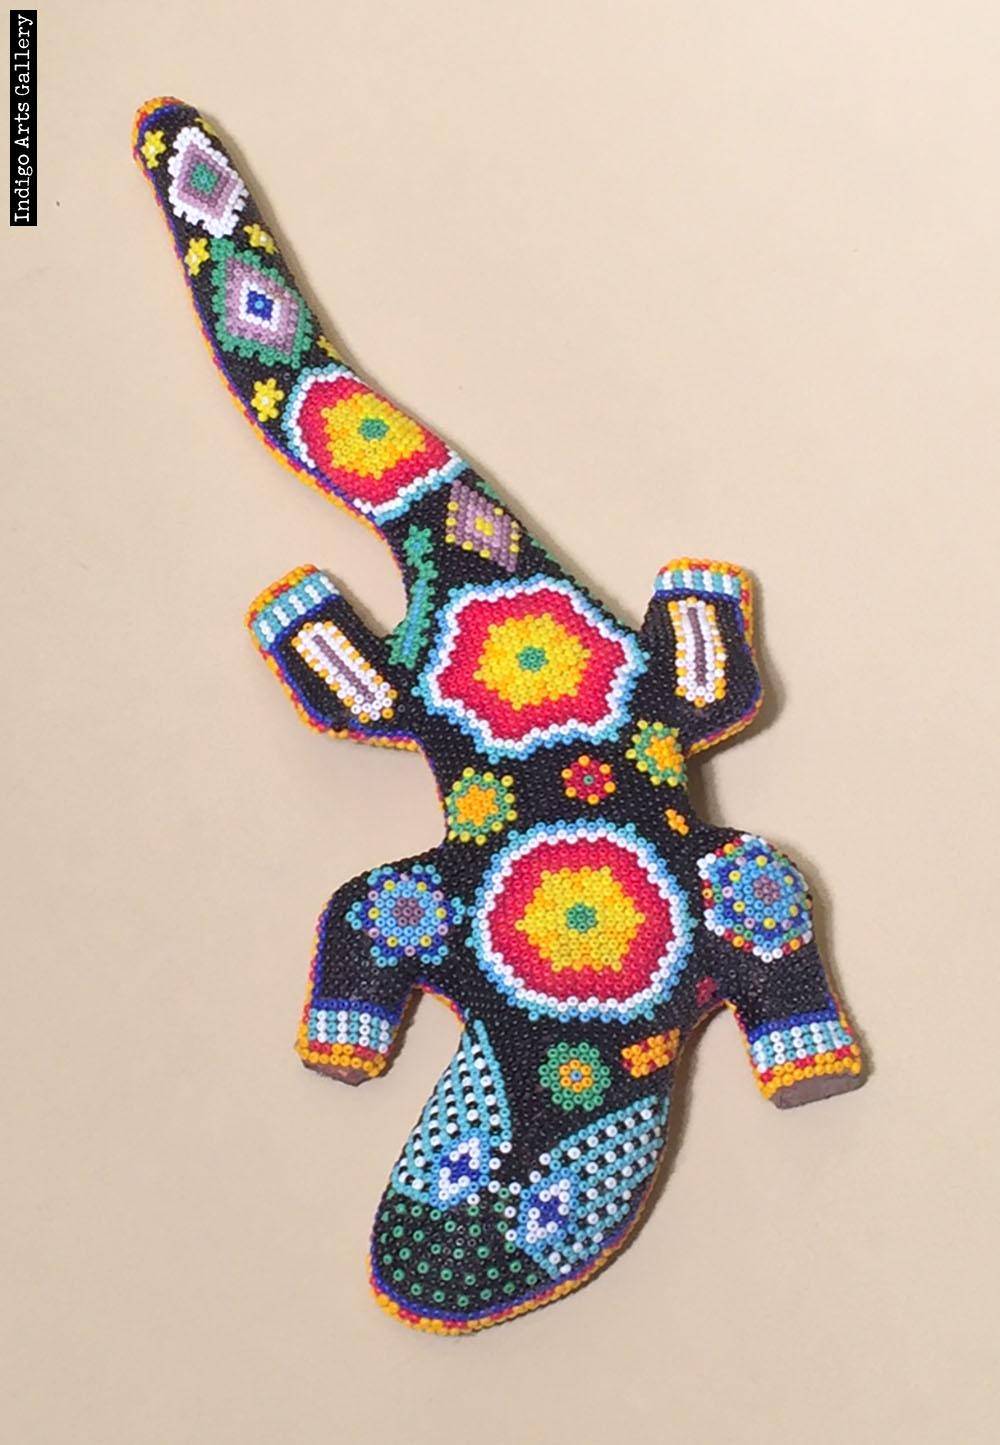 Large Huichol wood carved beaded lizzard